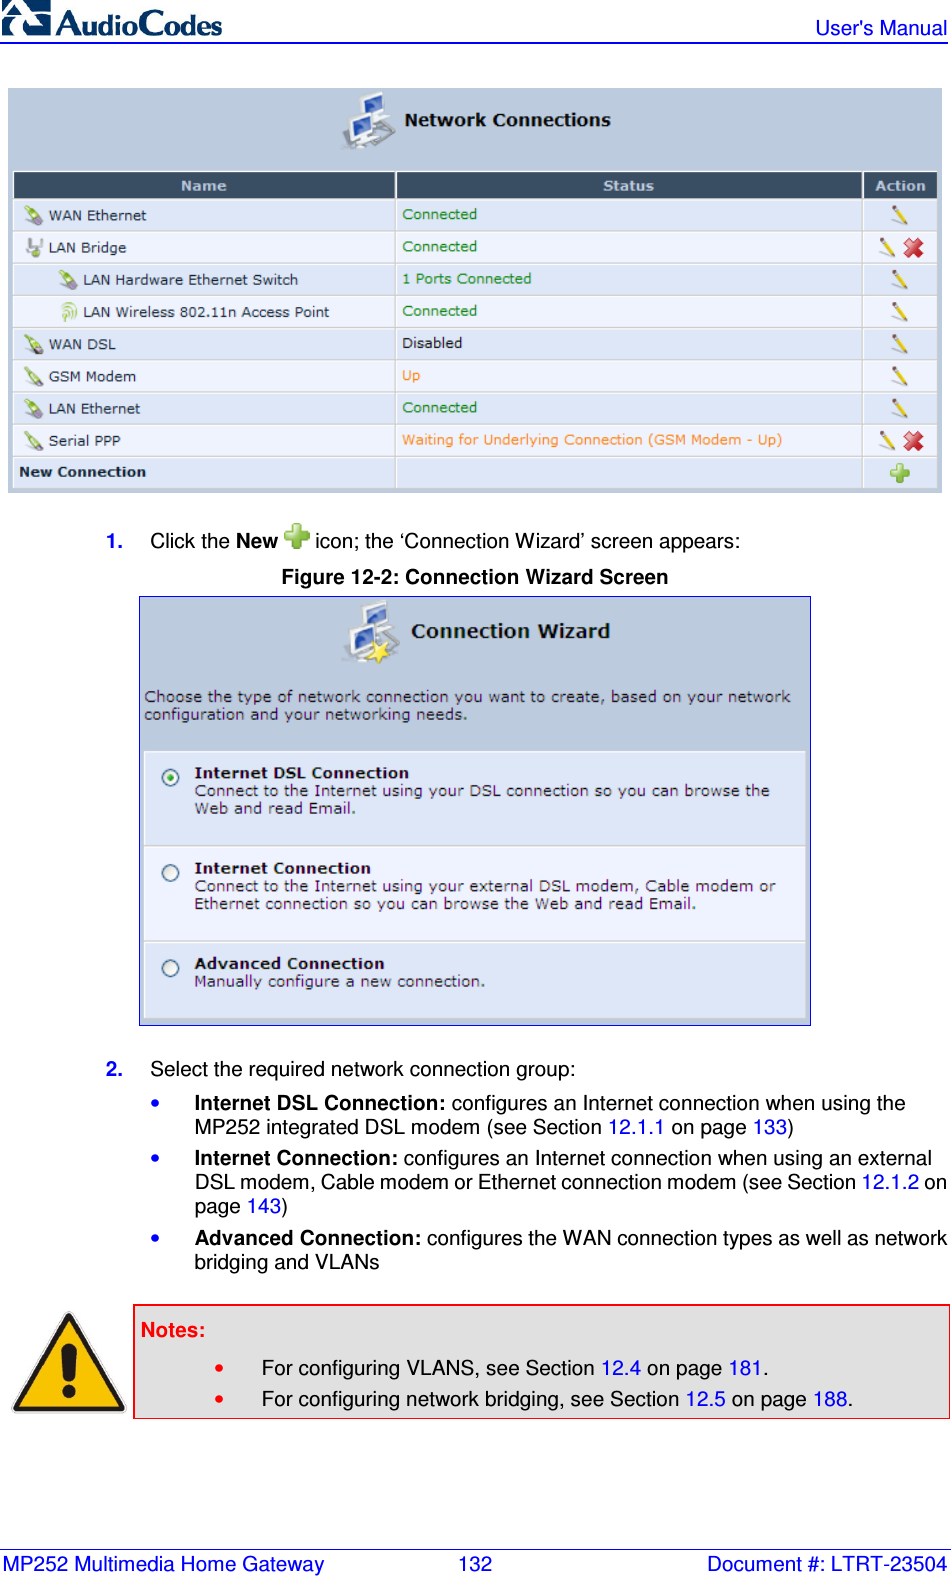 MP252 Multimedia Home Gateway  132  Document #: LTRT-23504   User&apos;s Manual   1.  Click the New   icon; the ‘Connection Wizard’ screen appears: Figure 12-2: Connection Wizard Screen  2.  Select the required network connection group: • Internet DSL Connection: configures an Internet connection when using the MP252 integrated DSL modem (see Section 12.1.1 on page 133) • Internet Connection: configures an Internet connection when using an external DSL modem, Cable modem or Ethernet connection modem (see Section 12.1.2 on page 143) • Advanced Connection: configures the WAN connection types as well as network bridging and VLANs   Notes:   • For configuring VLANS, see Section 12.4 on page 181. • For configuring network bridging, see Section 12.5 on page 188.   